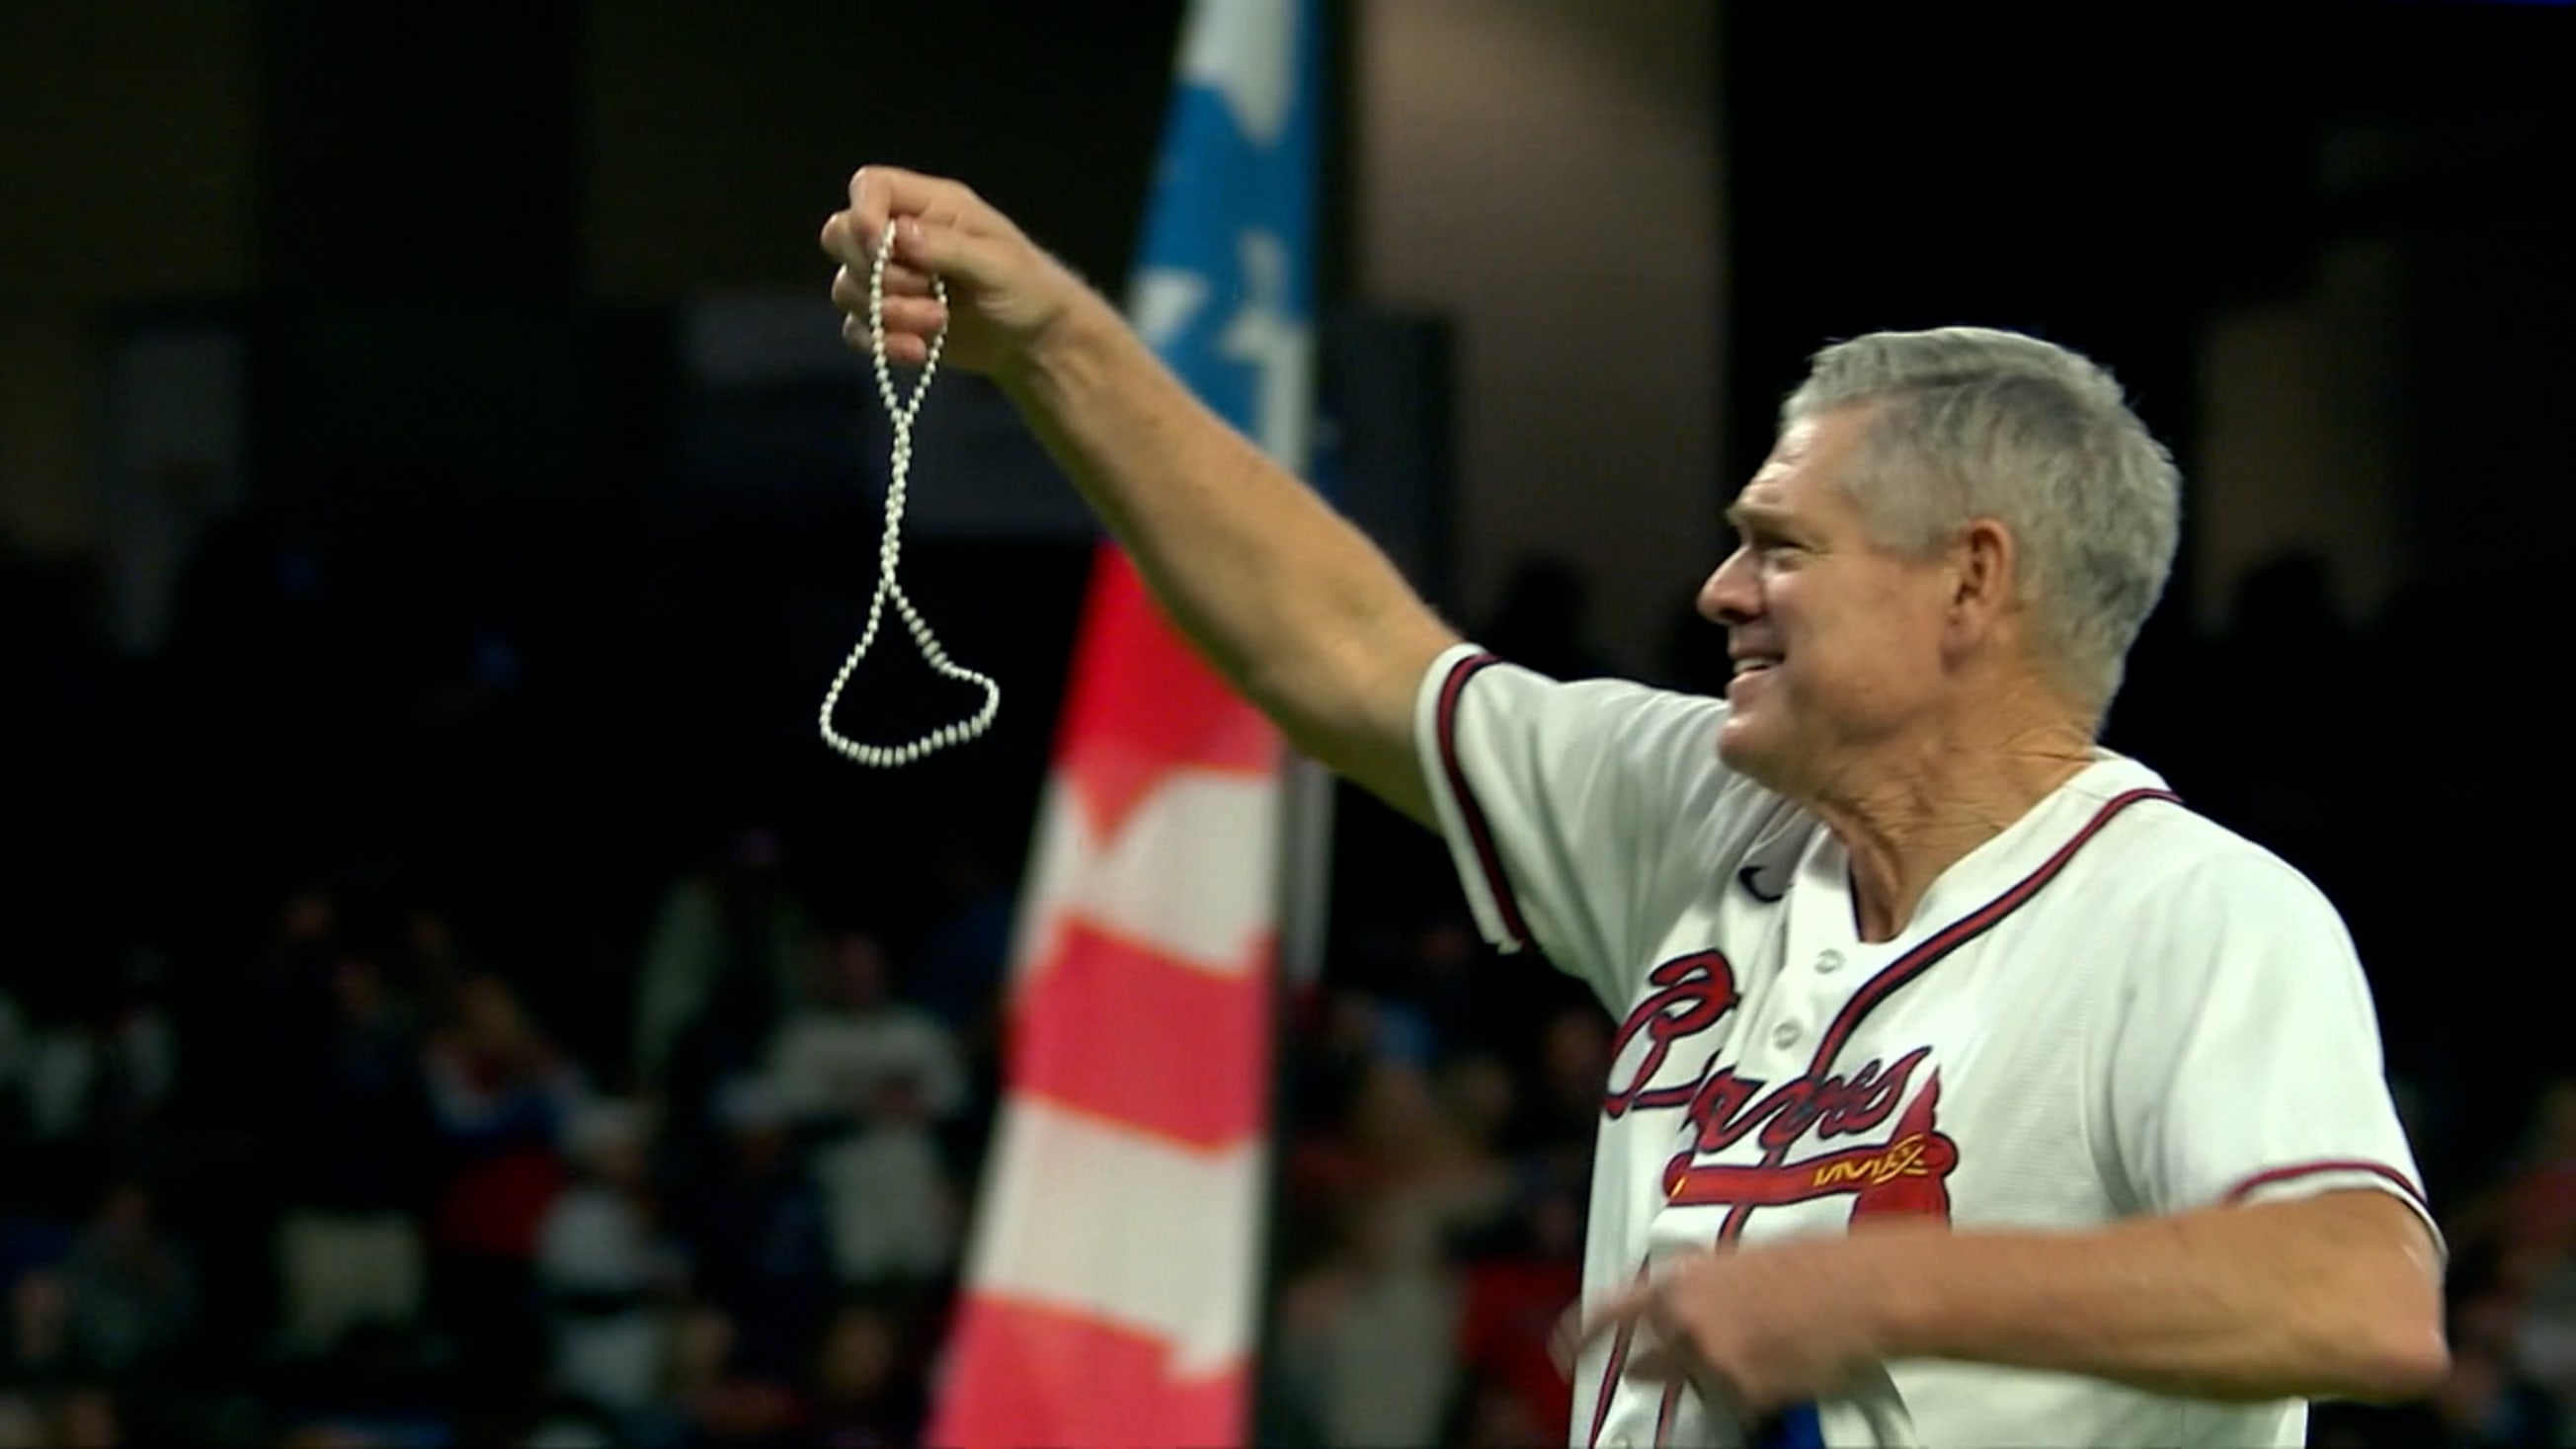 MMO Exclusive Interview: Two-Time MVP, Dale Murphy - Metsmerized Online